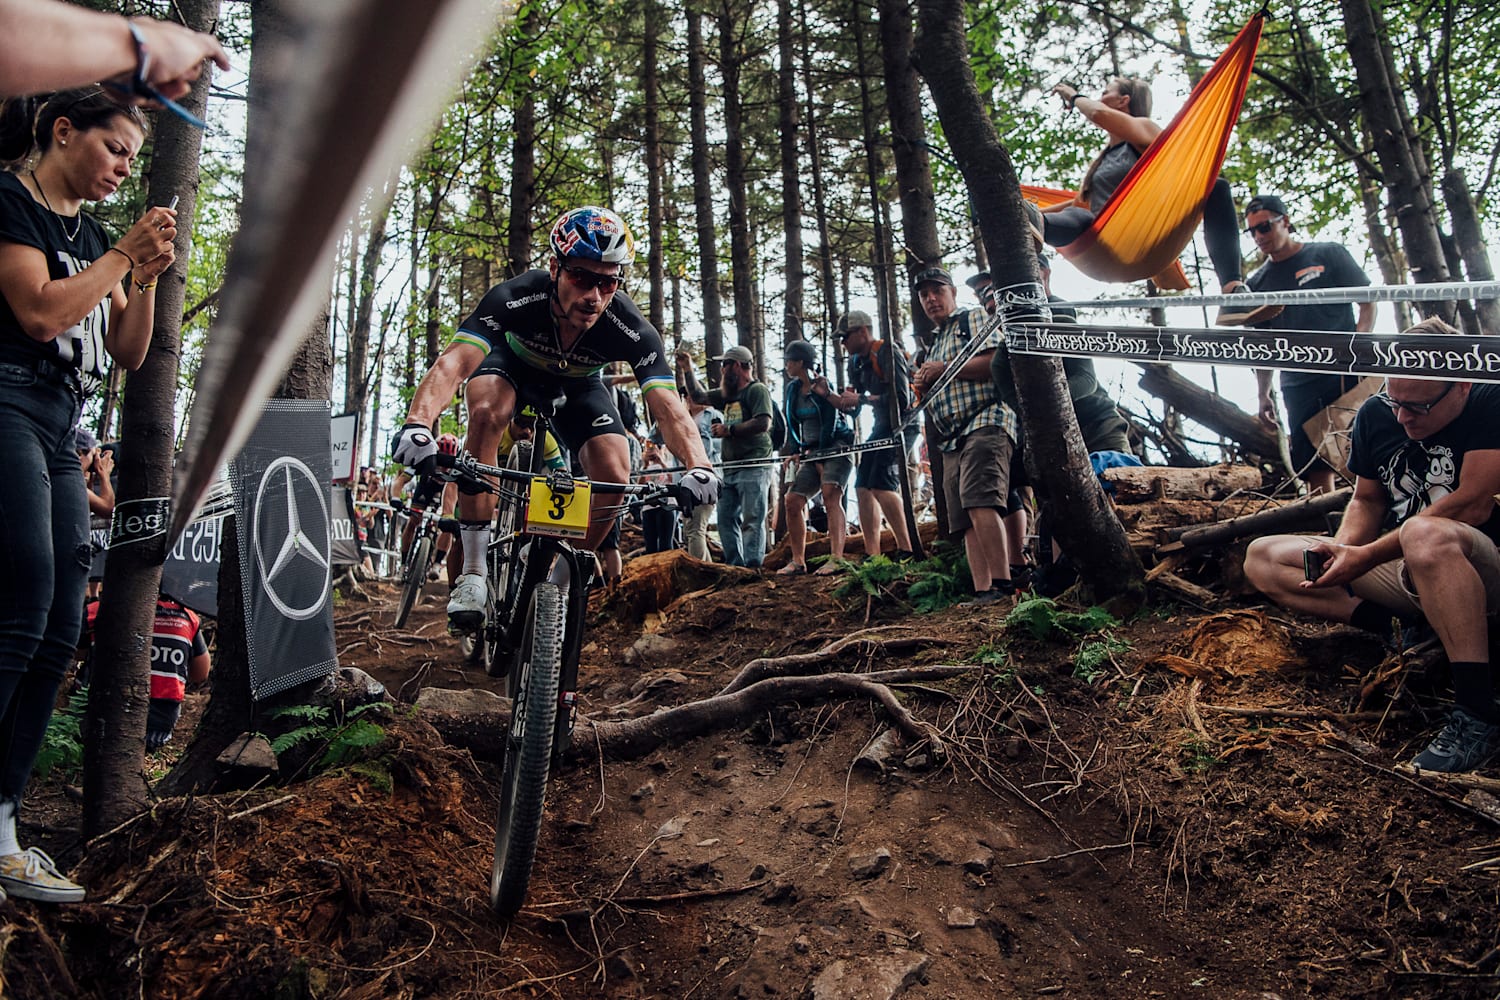 UCI CrossCountry World Cup 2019 highlights videos